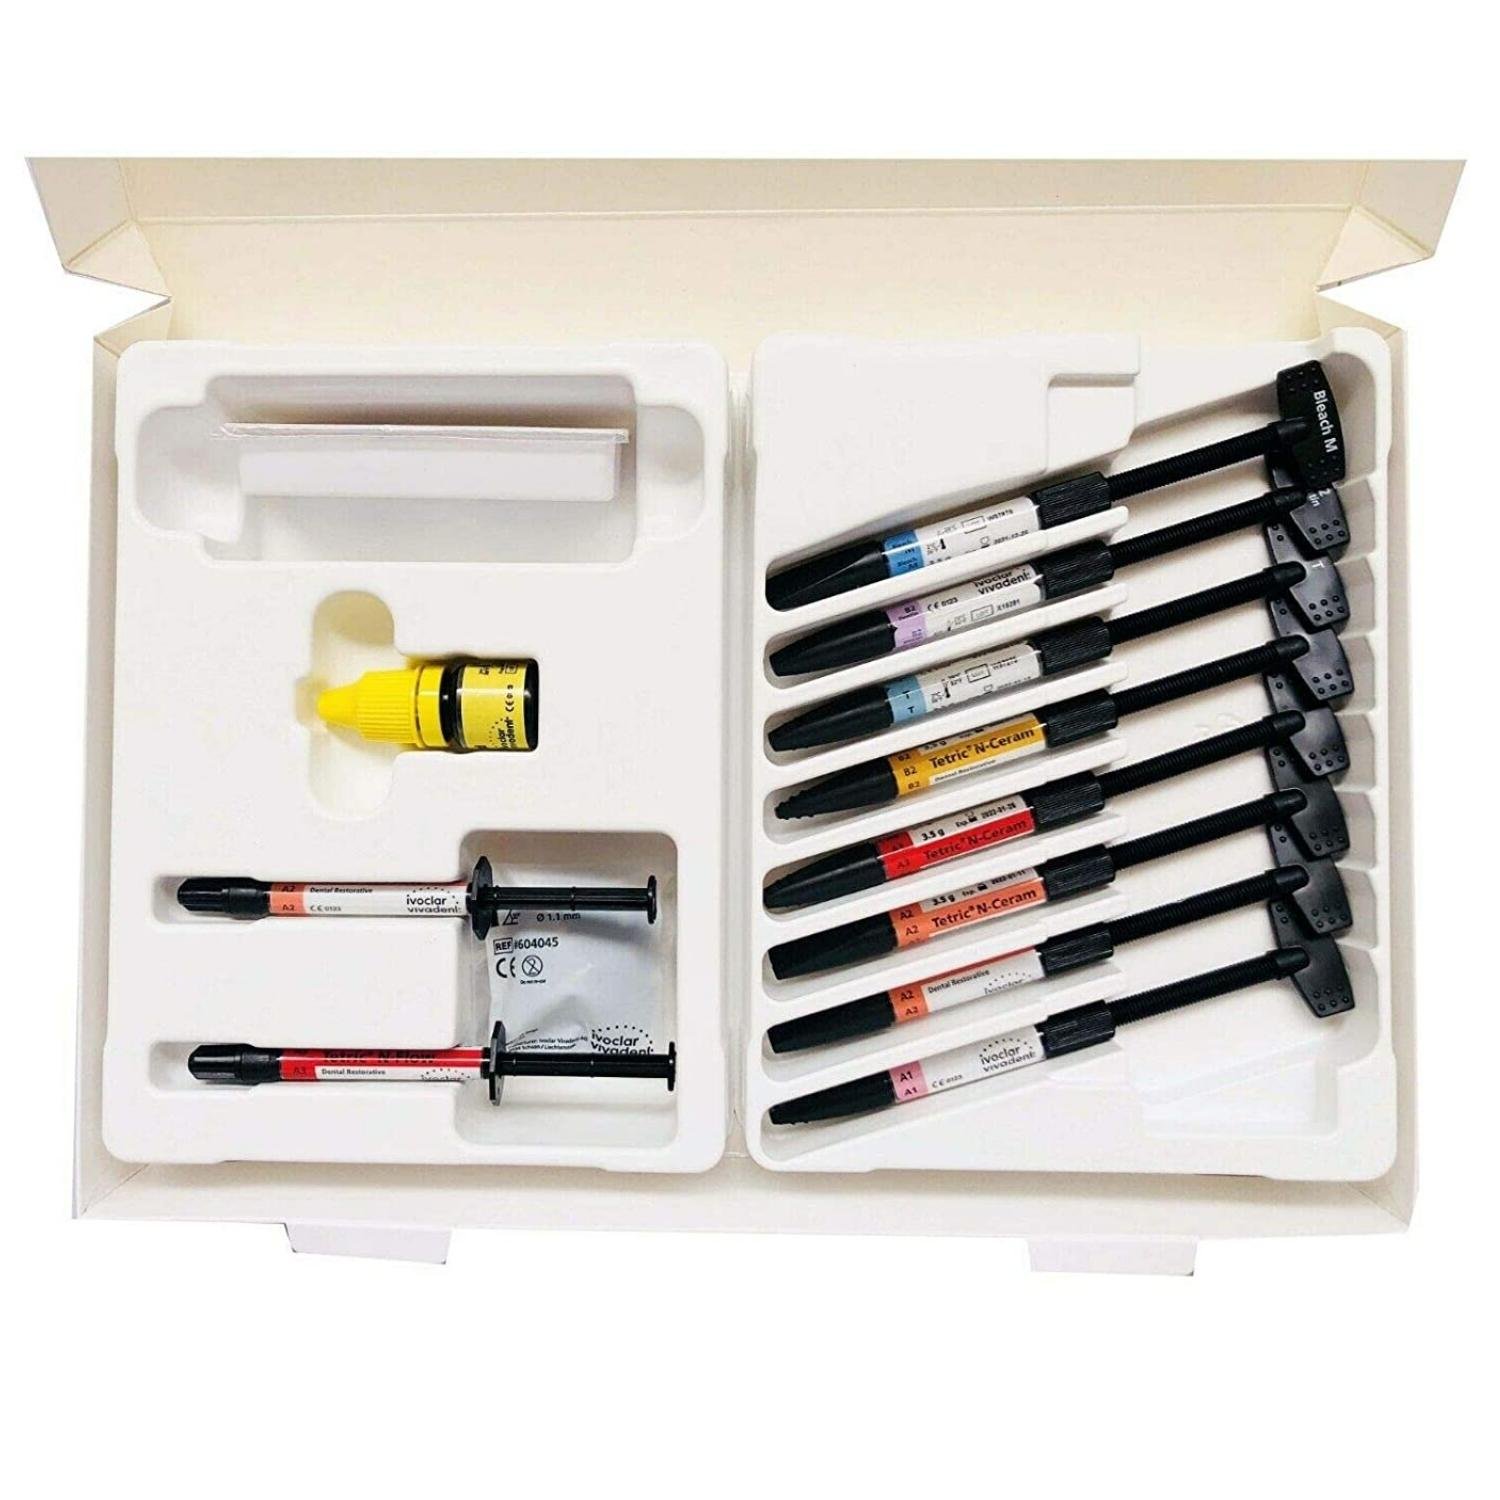 TETRIC N-COLLECTION SYSTEM KIT. IVOCLAR